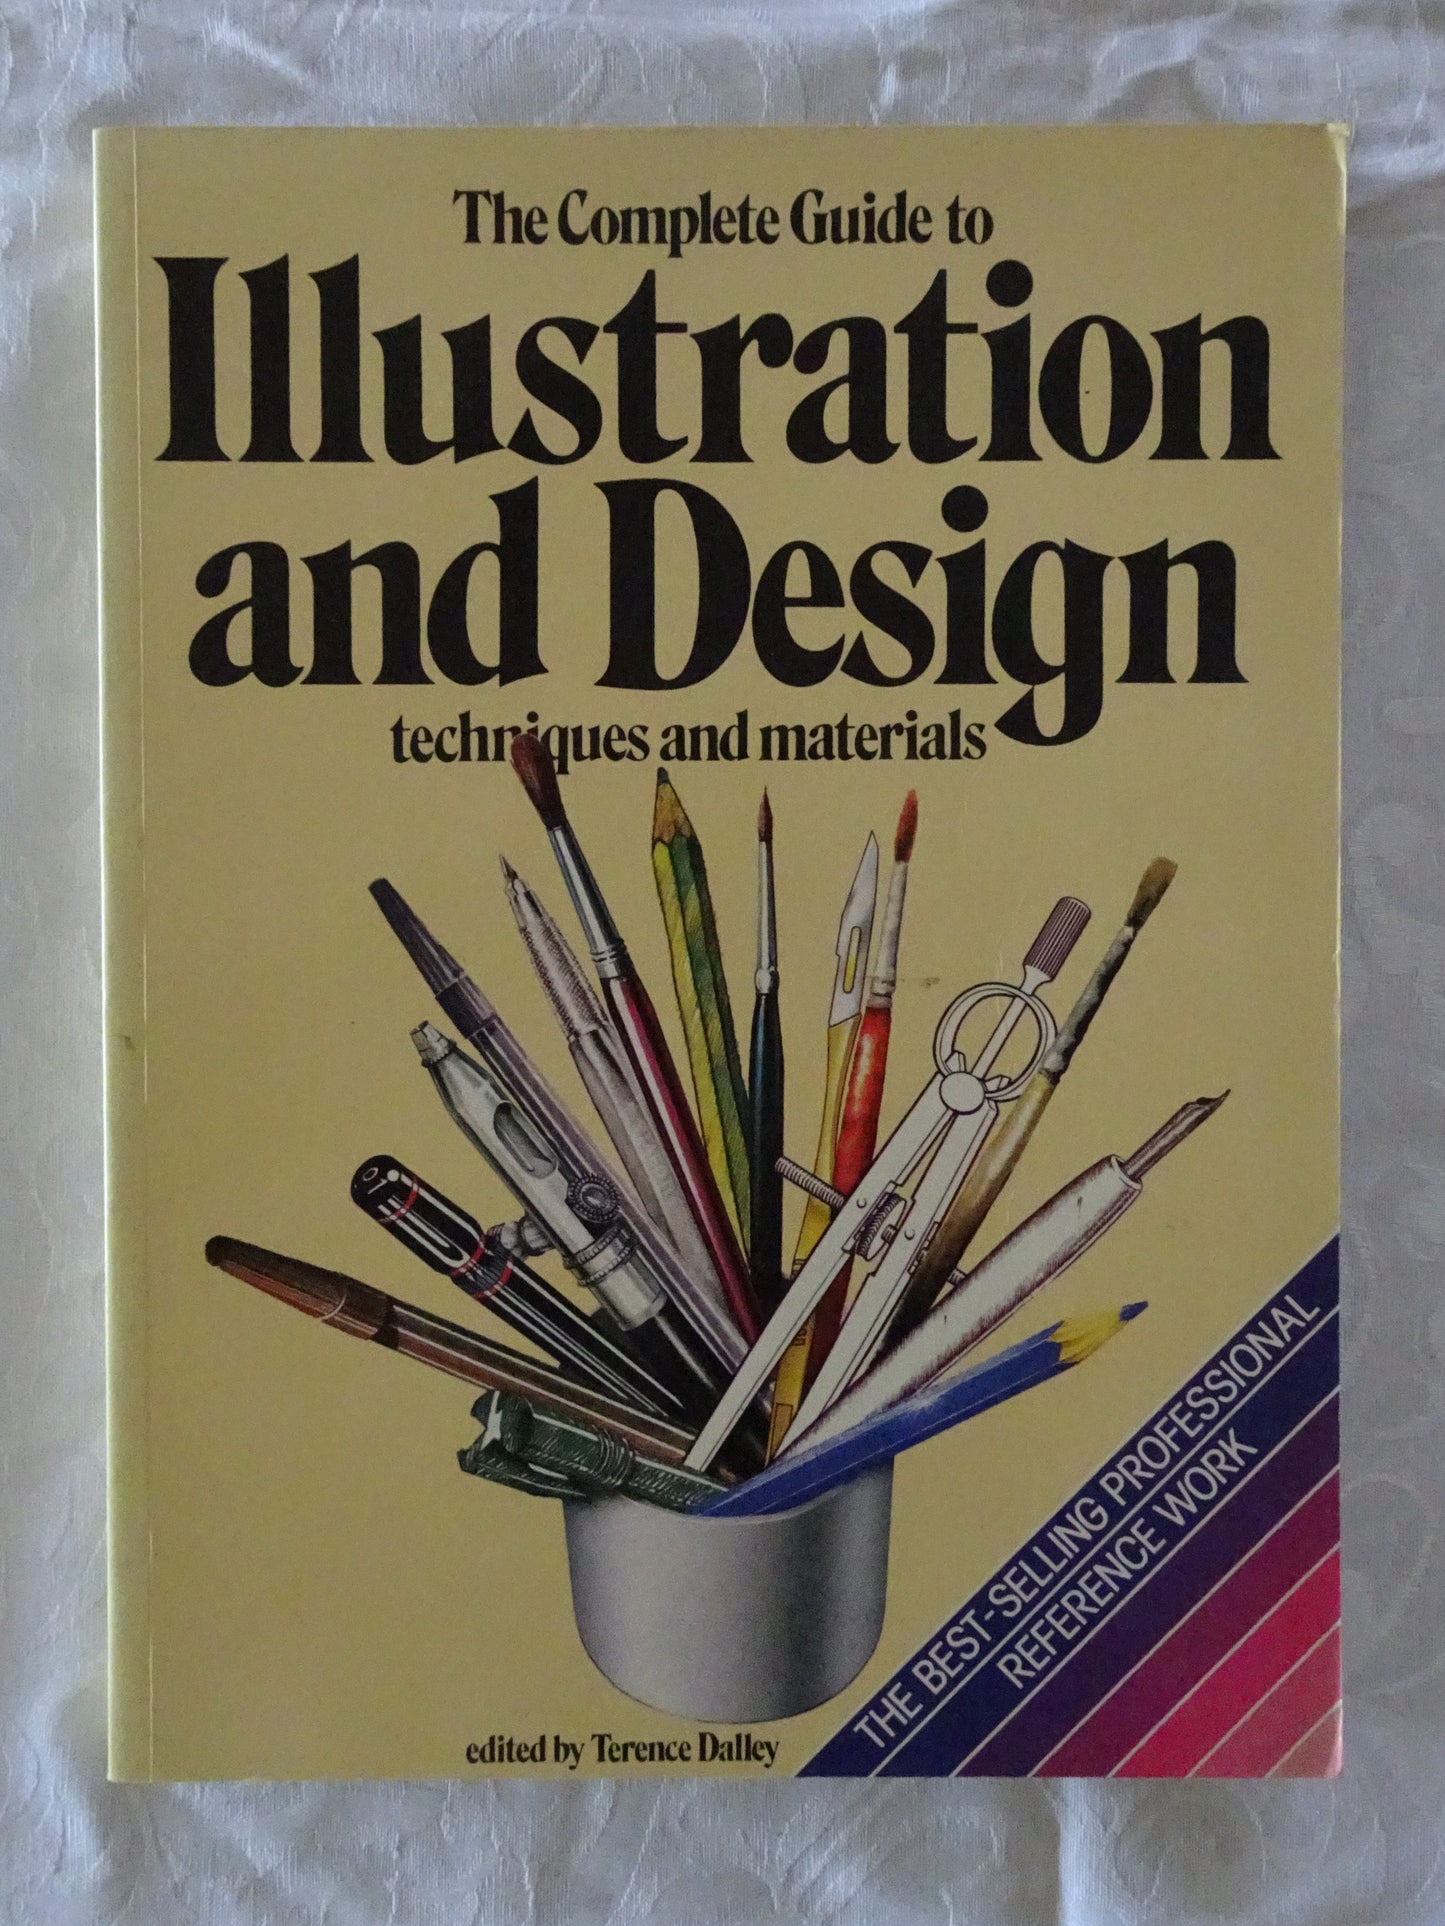 The Complete Guide to Illustration and Design by Terence Dalley